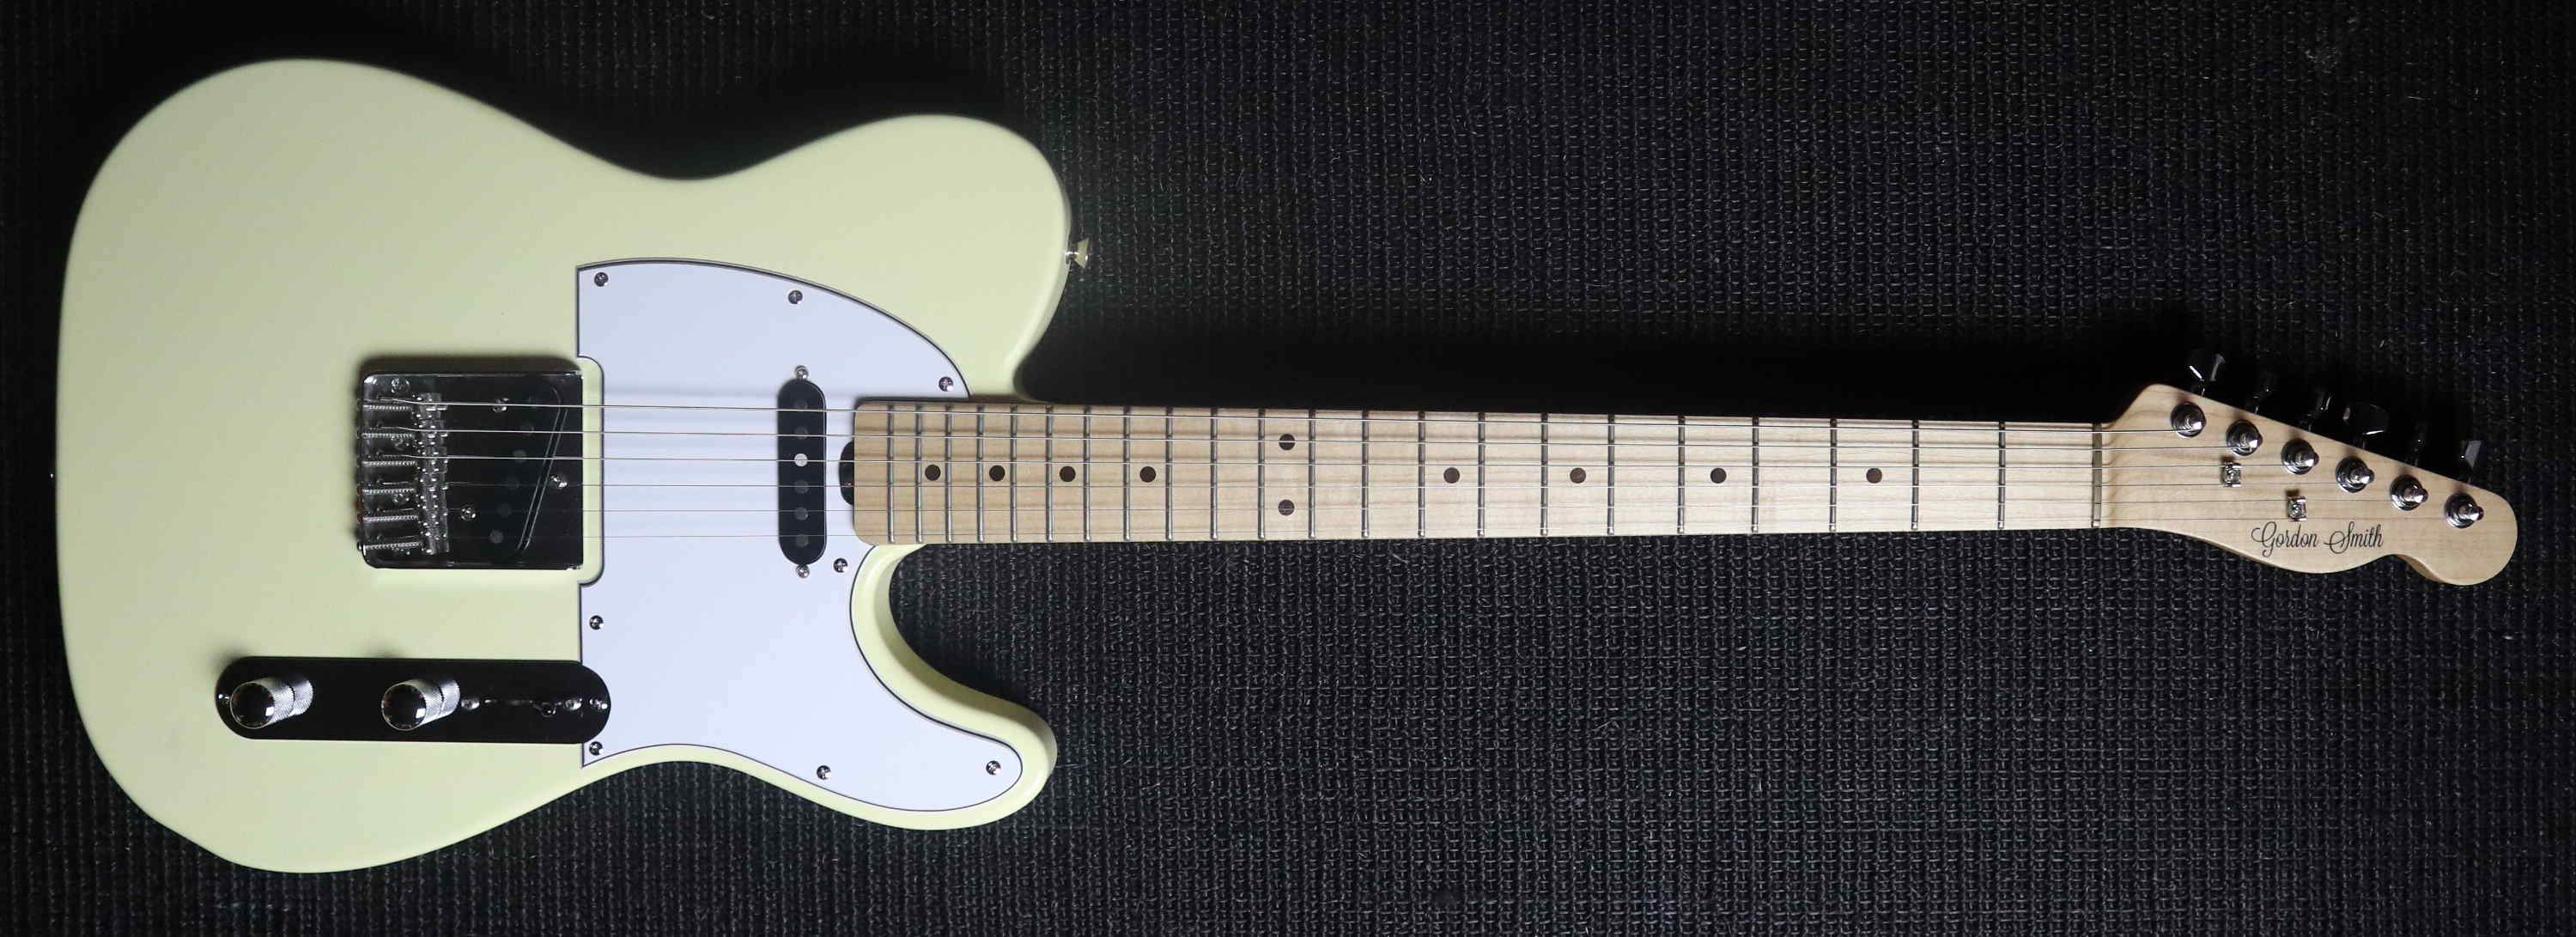 Gordon Smith Classic T Satin Yellow Maple Neck, Electric Guitar for sale at Richards Guitars.